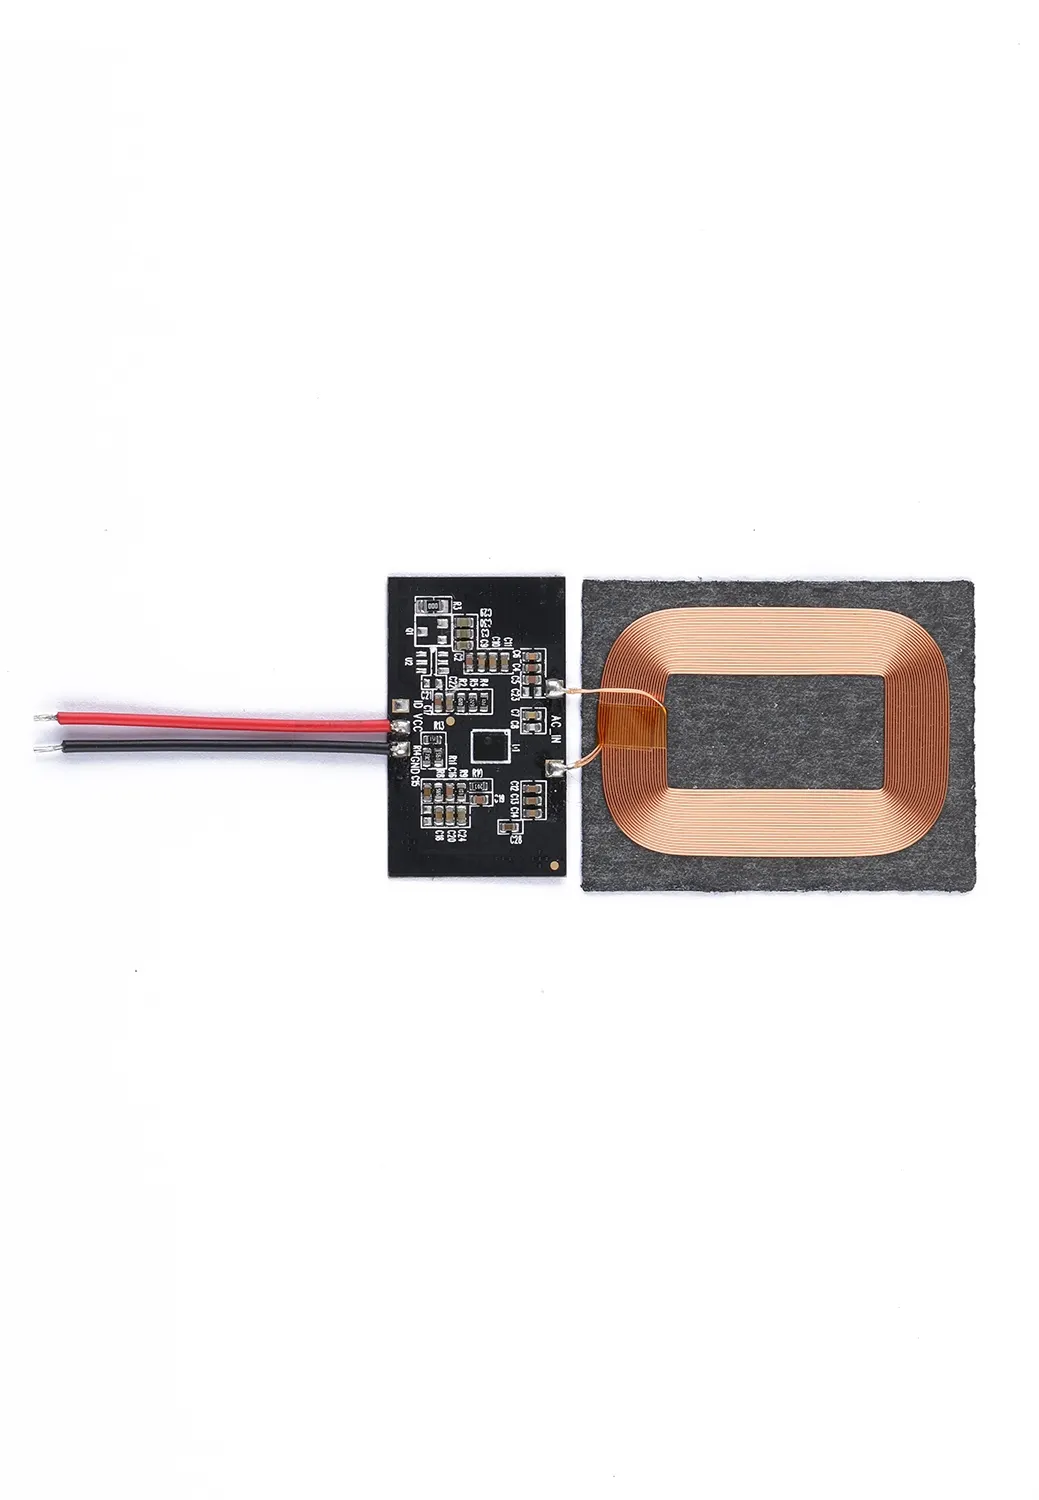 USB Type C Mobile Phone 5V 9V QI Receiver PCB 5W 10W Android QI Wireless Charger Receiver Module